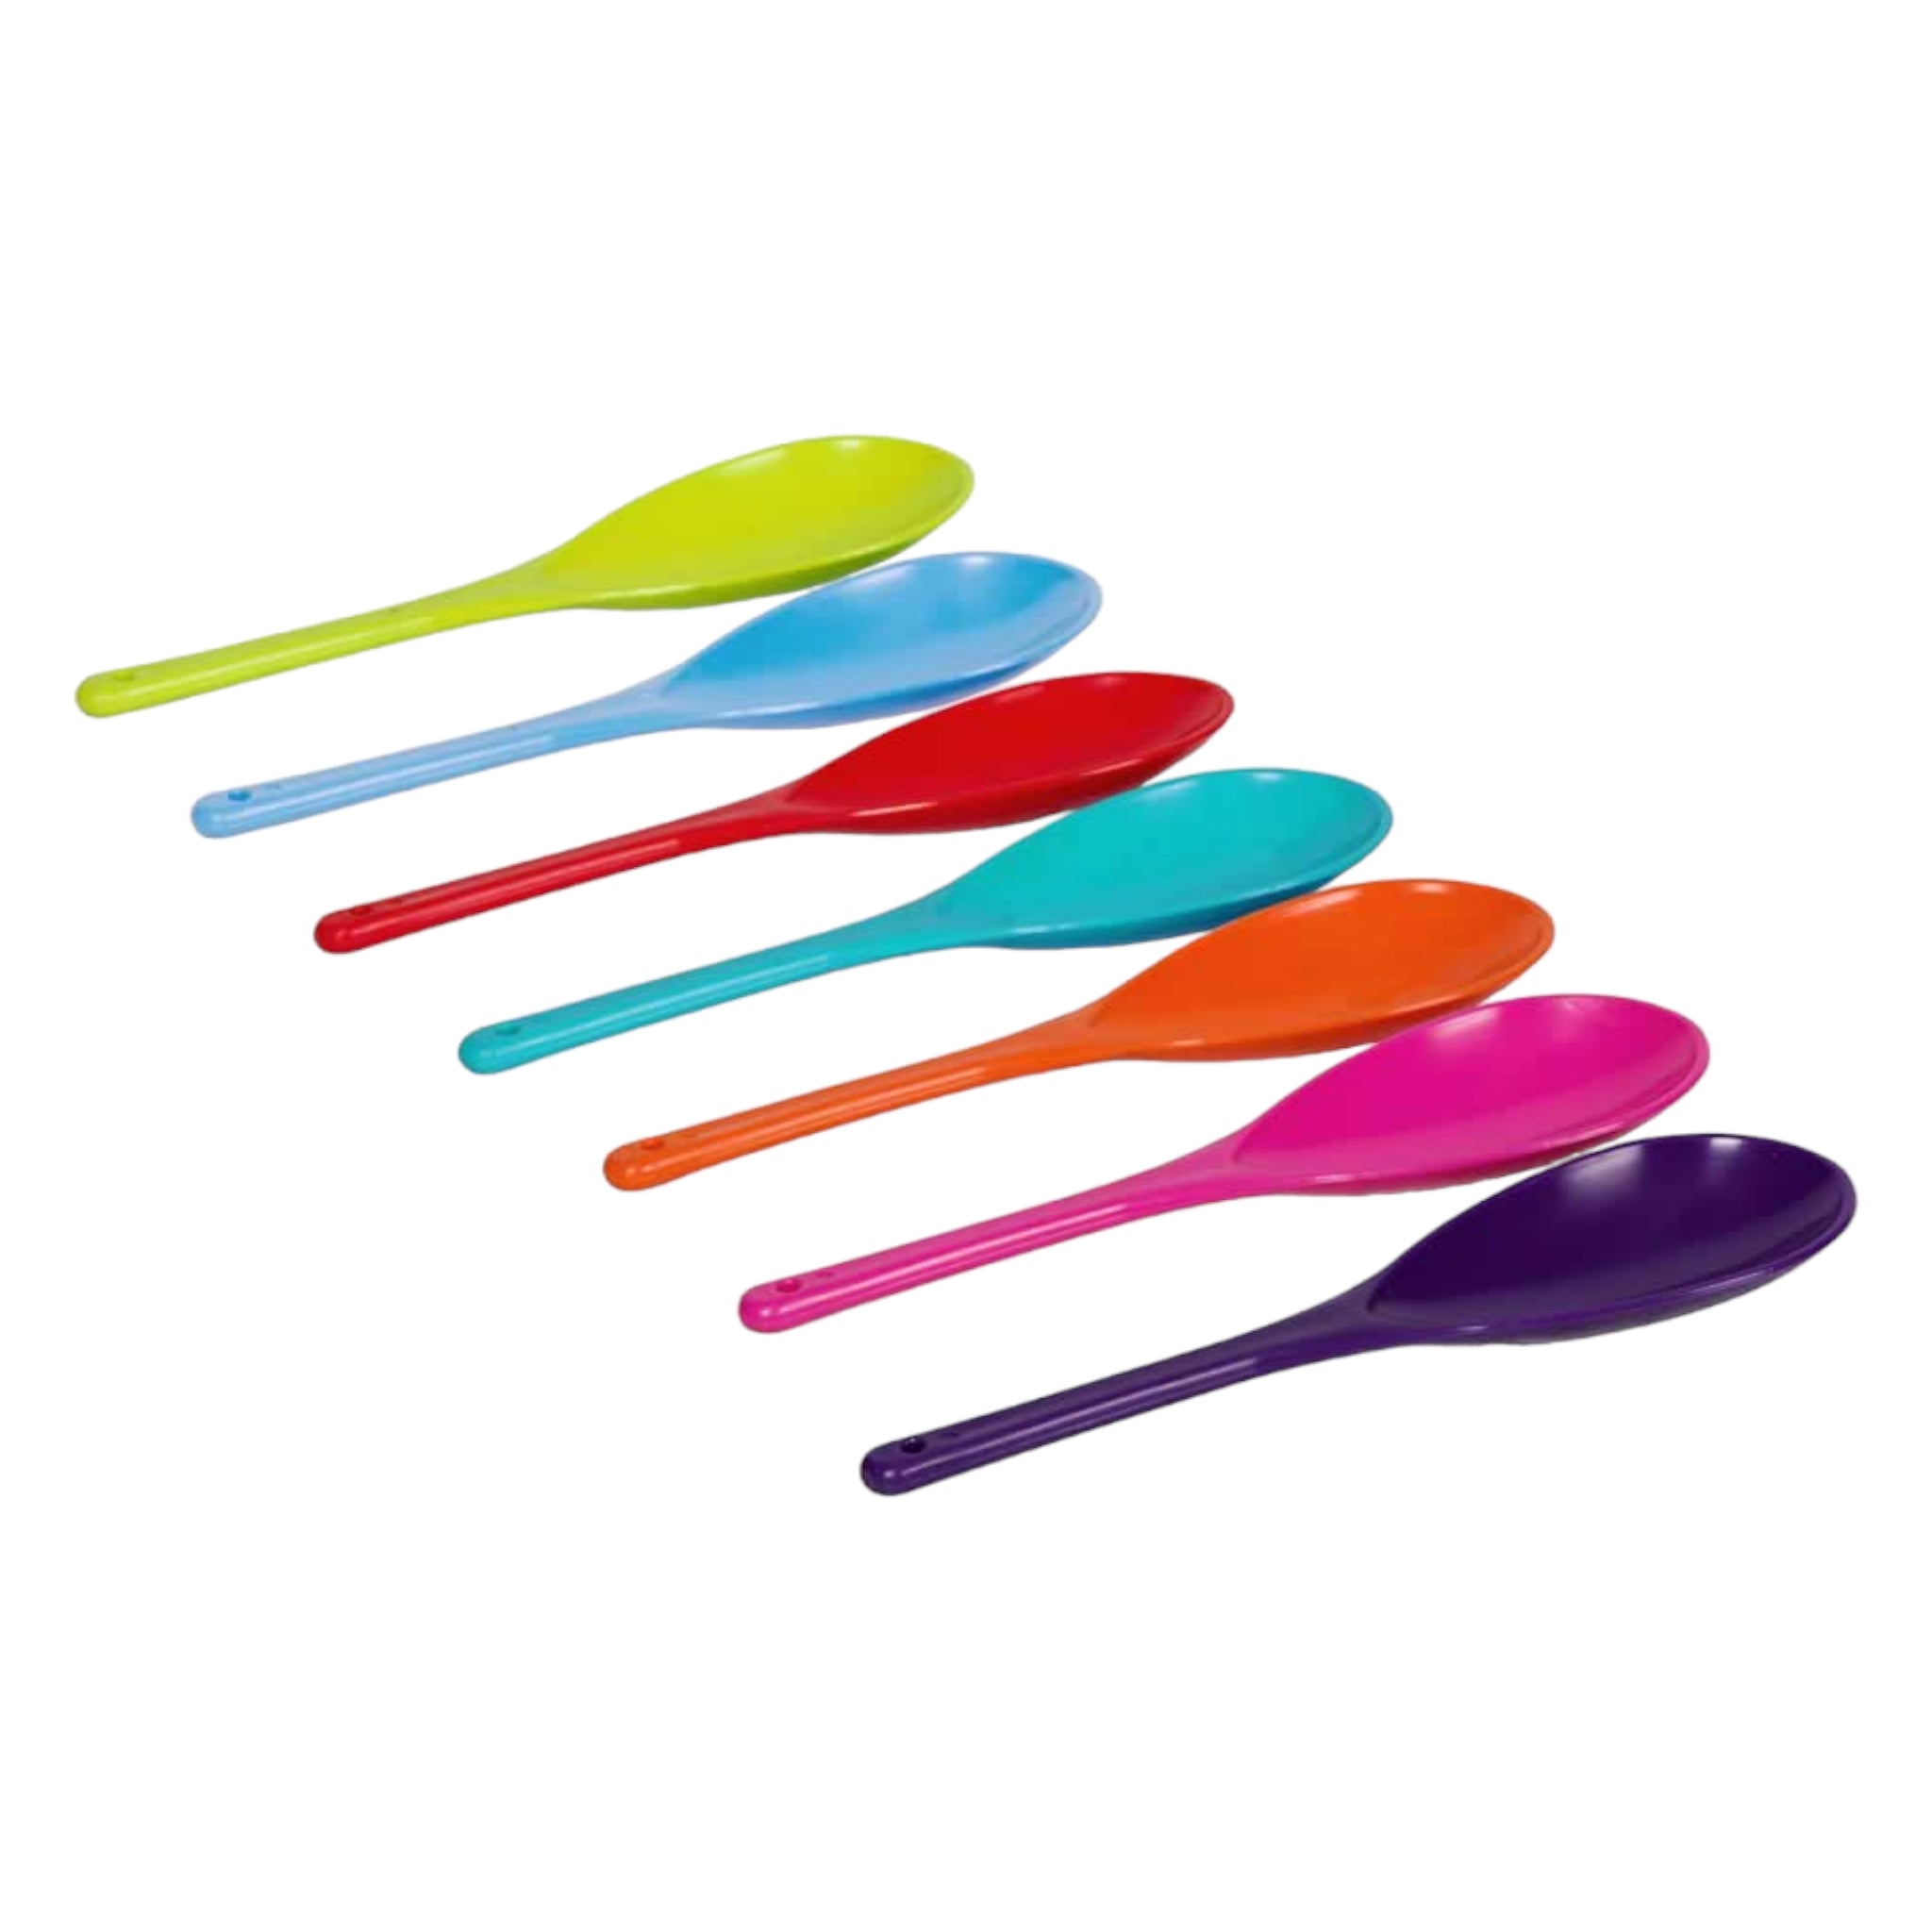 Plastic Serving Spoon Small 5pack Buzz